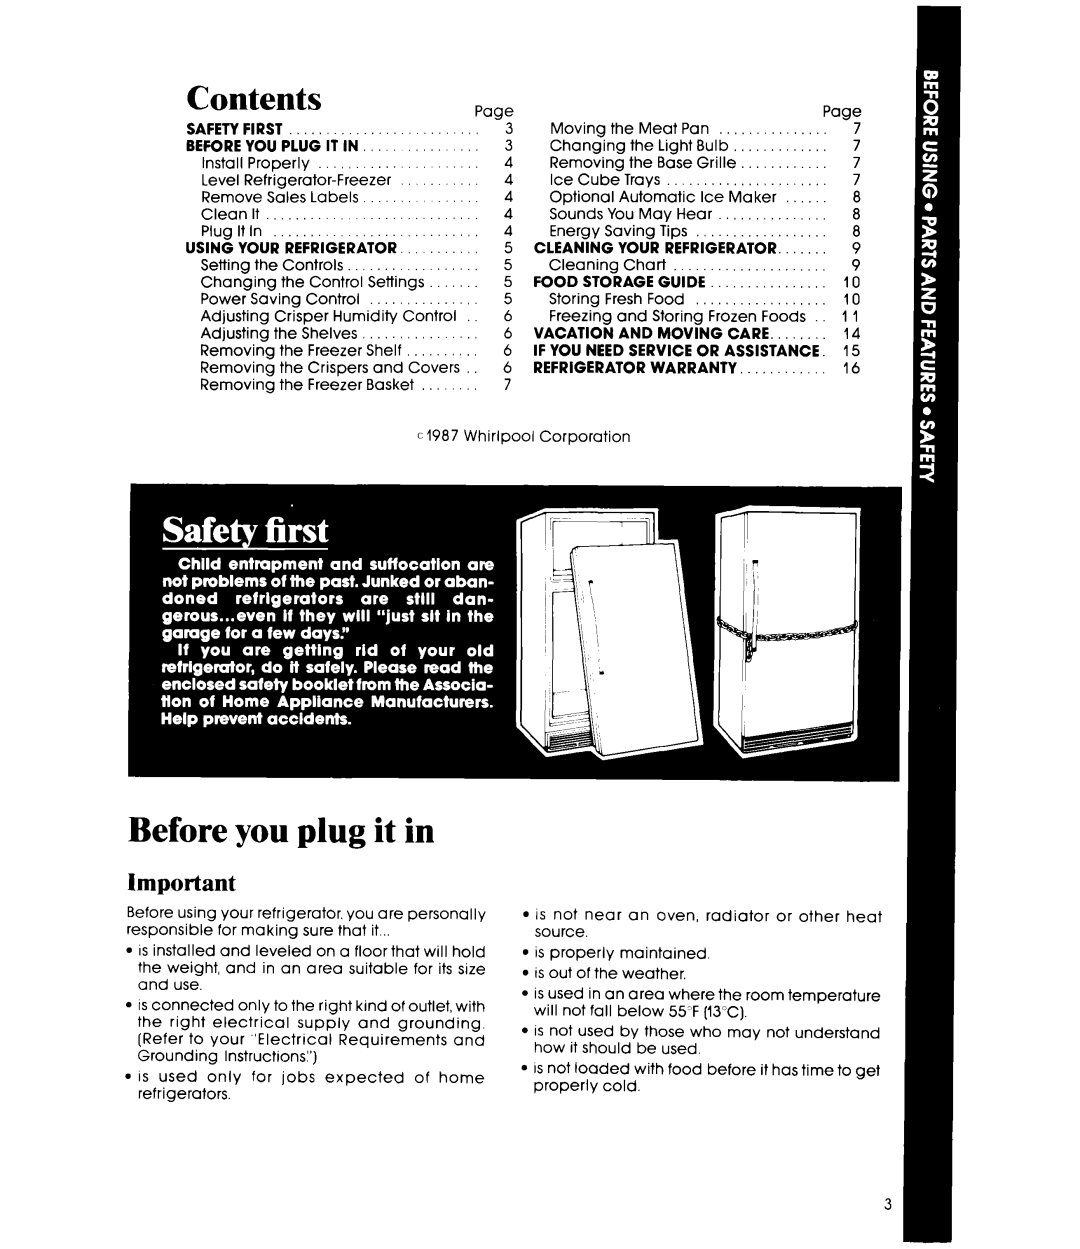 Whirlpool EF19MK manual Before you plug it in, Contents 